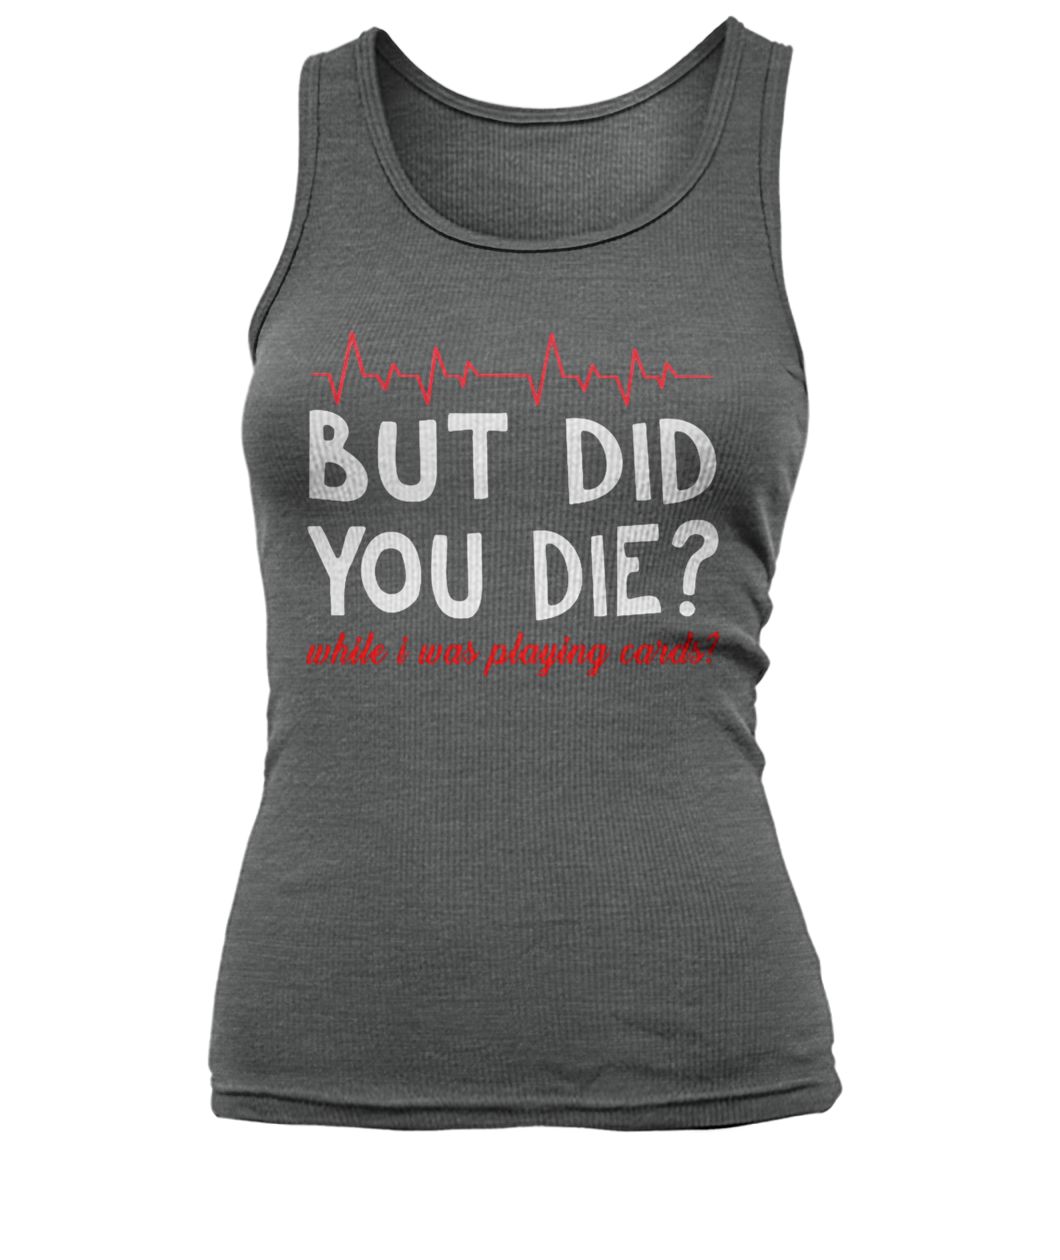 But did you die while I was playing card women's tank top